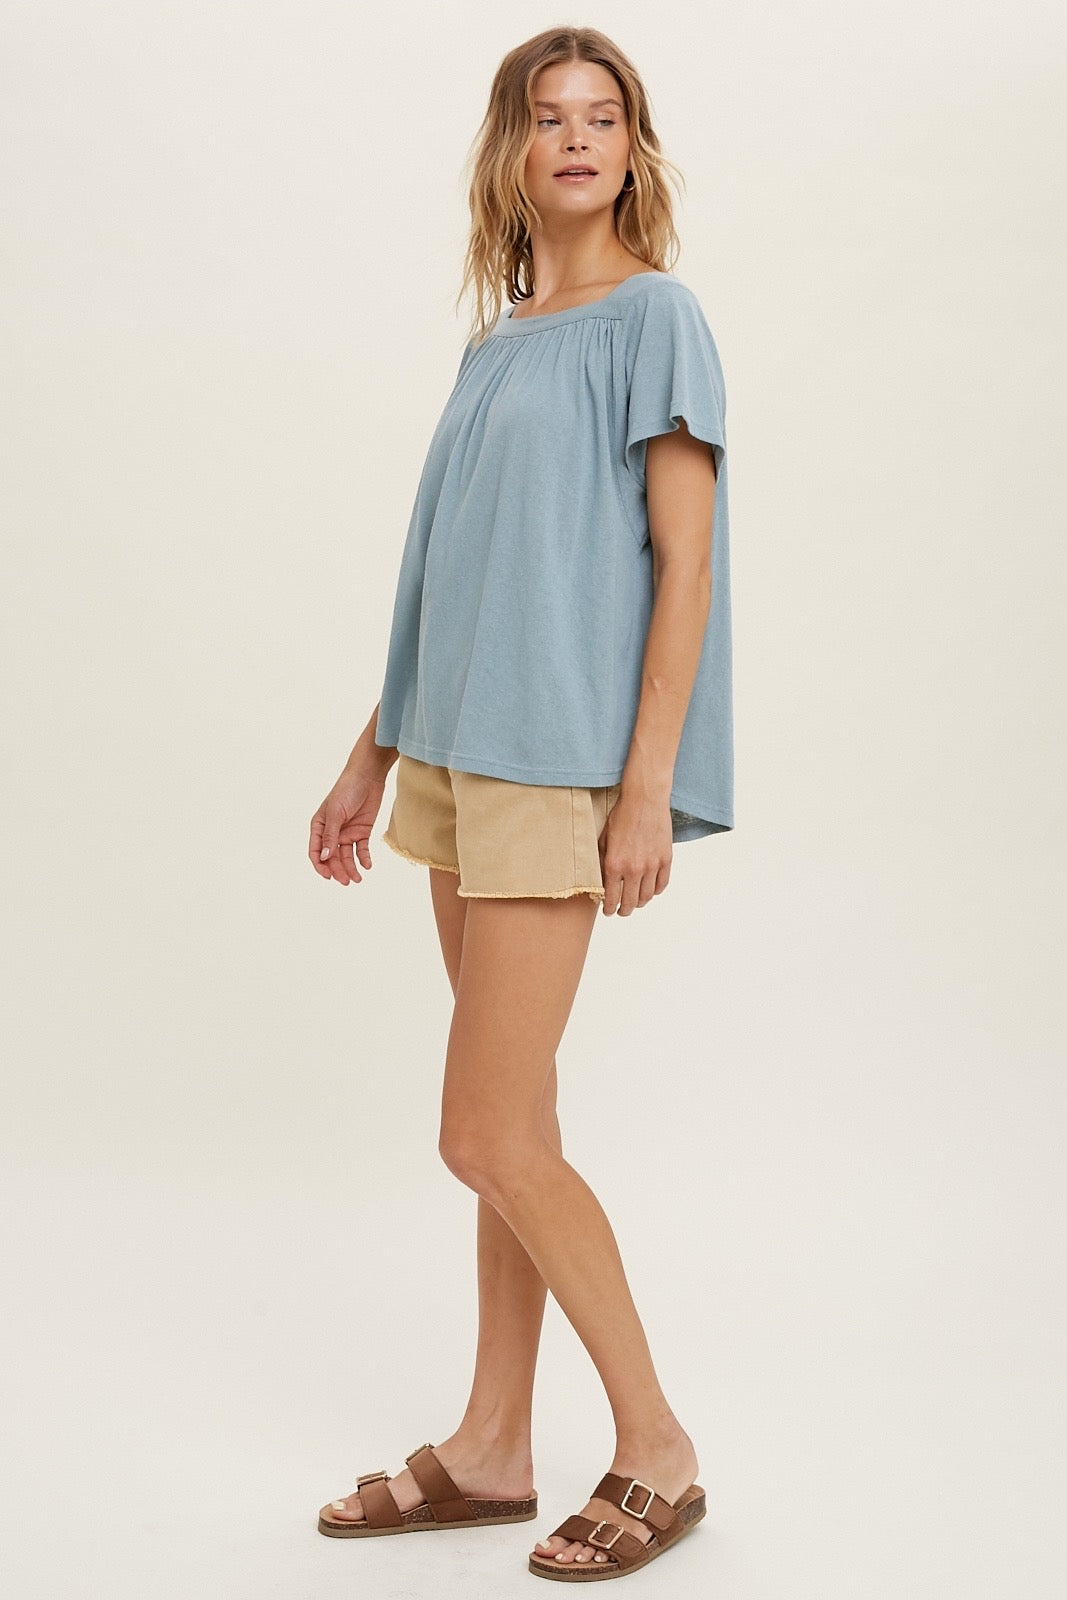 Wishlist® Square neck knit top with tie back